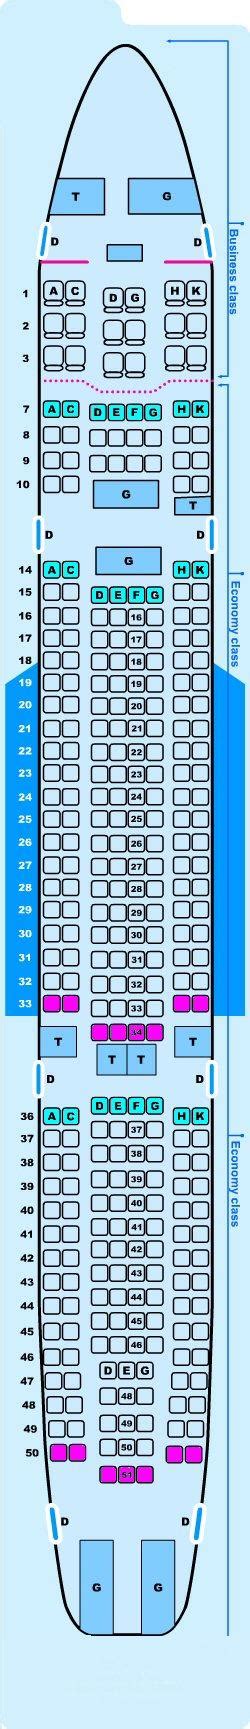 Airbus Industrie A Seat Map Delta Tutorial Pics